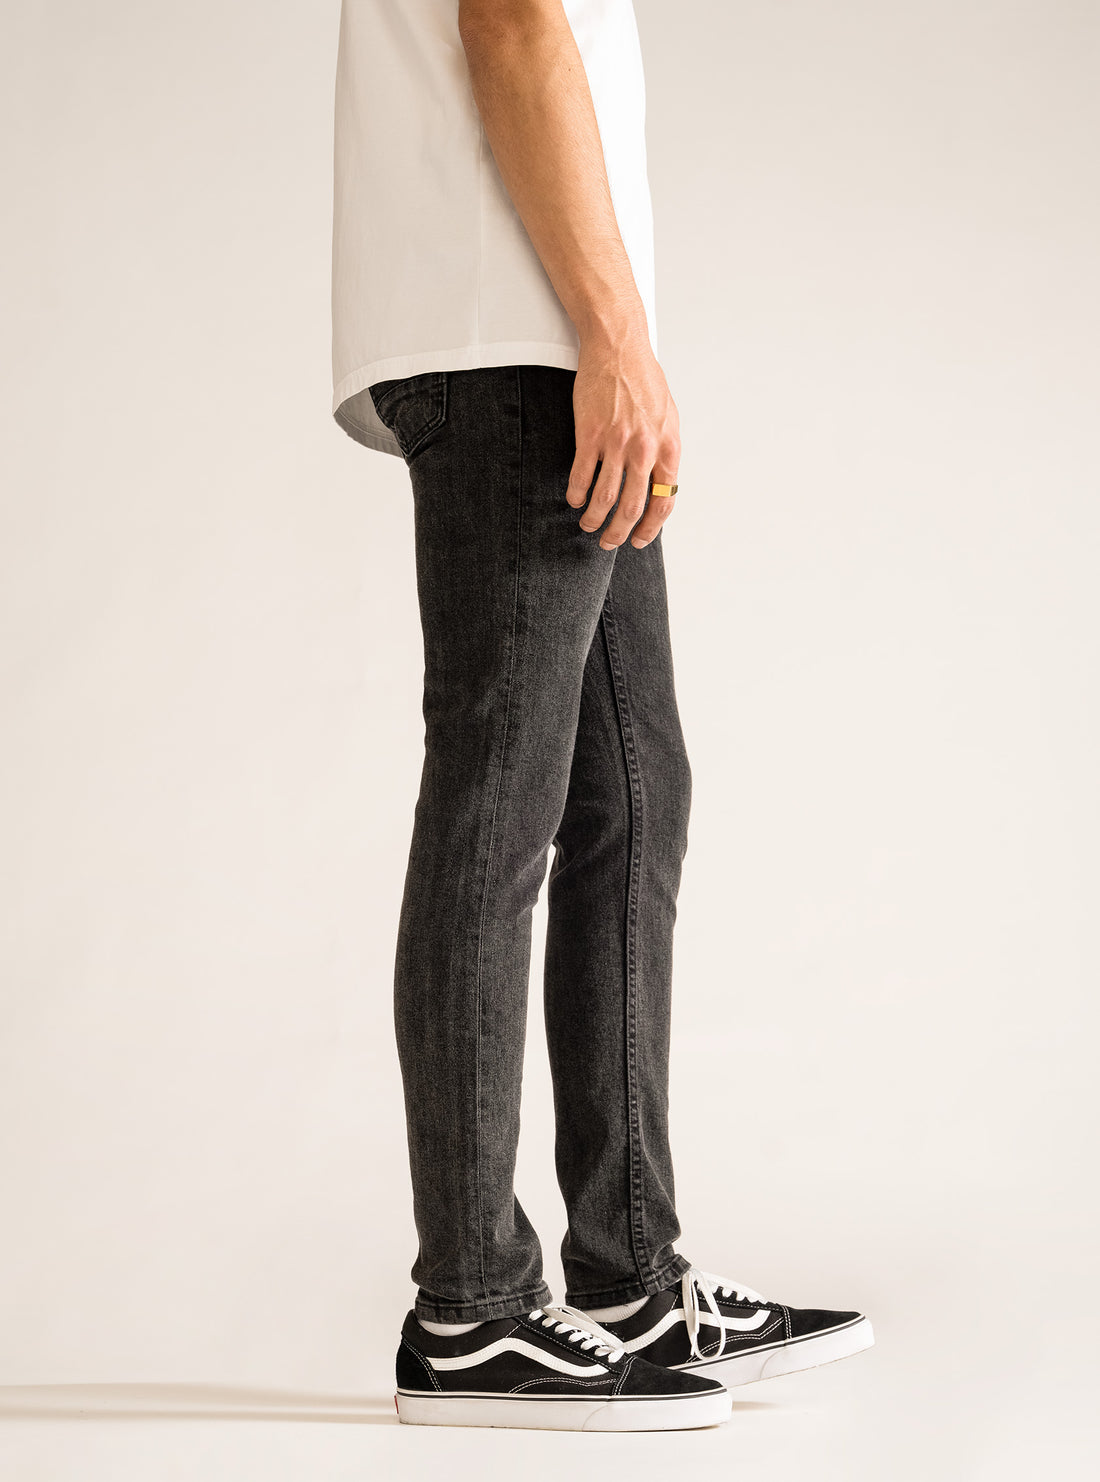 Dark Thoughts Skinny Jeans, Gris Obscuro